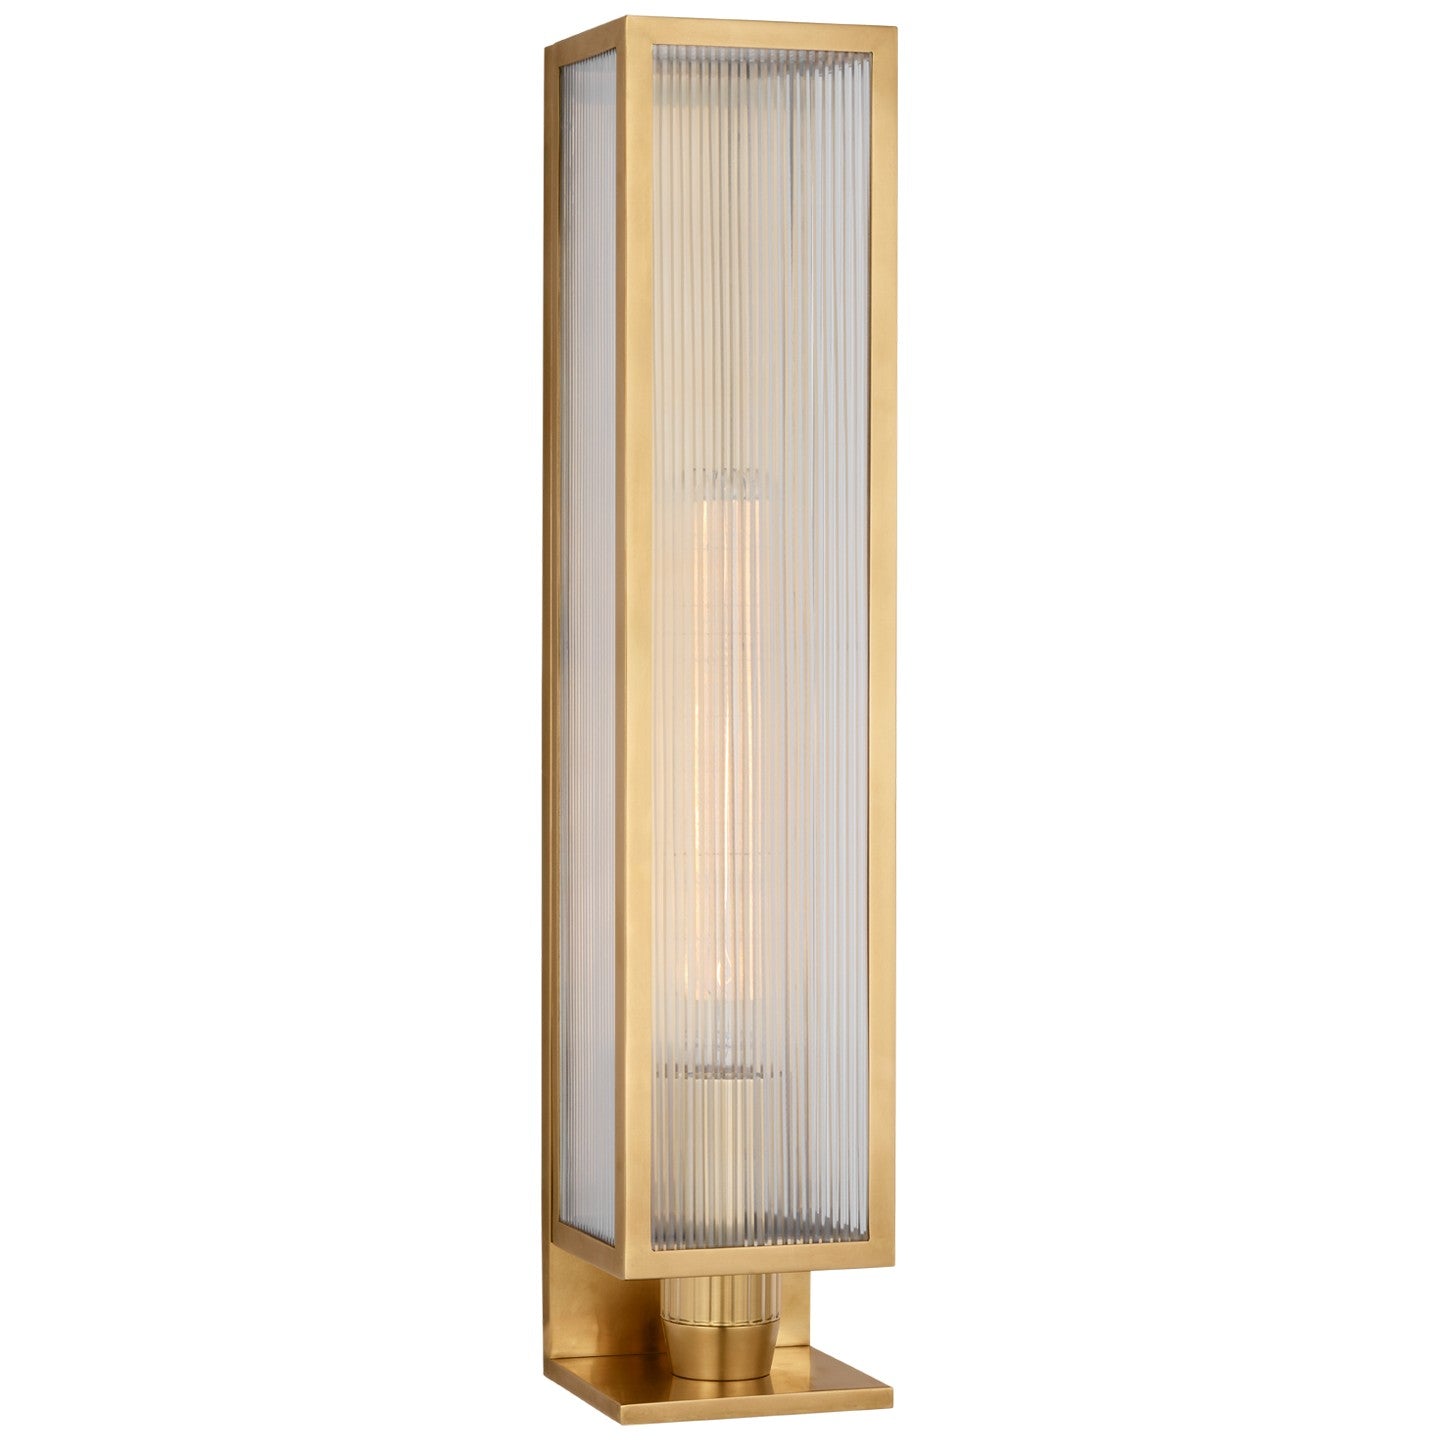 Visual Comfort Signature - BBL 2186SB-CRB - LED Outdoor Wall Sconce - York - Soft Brass